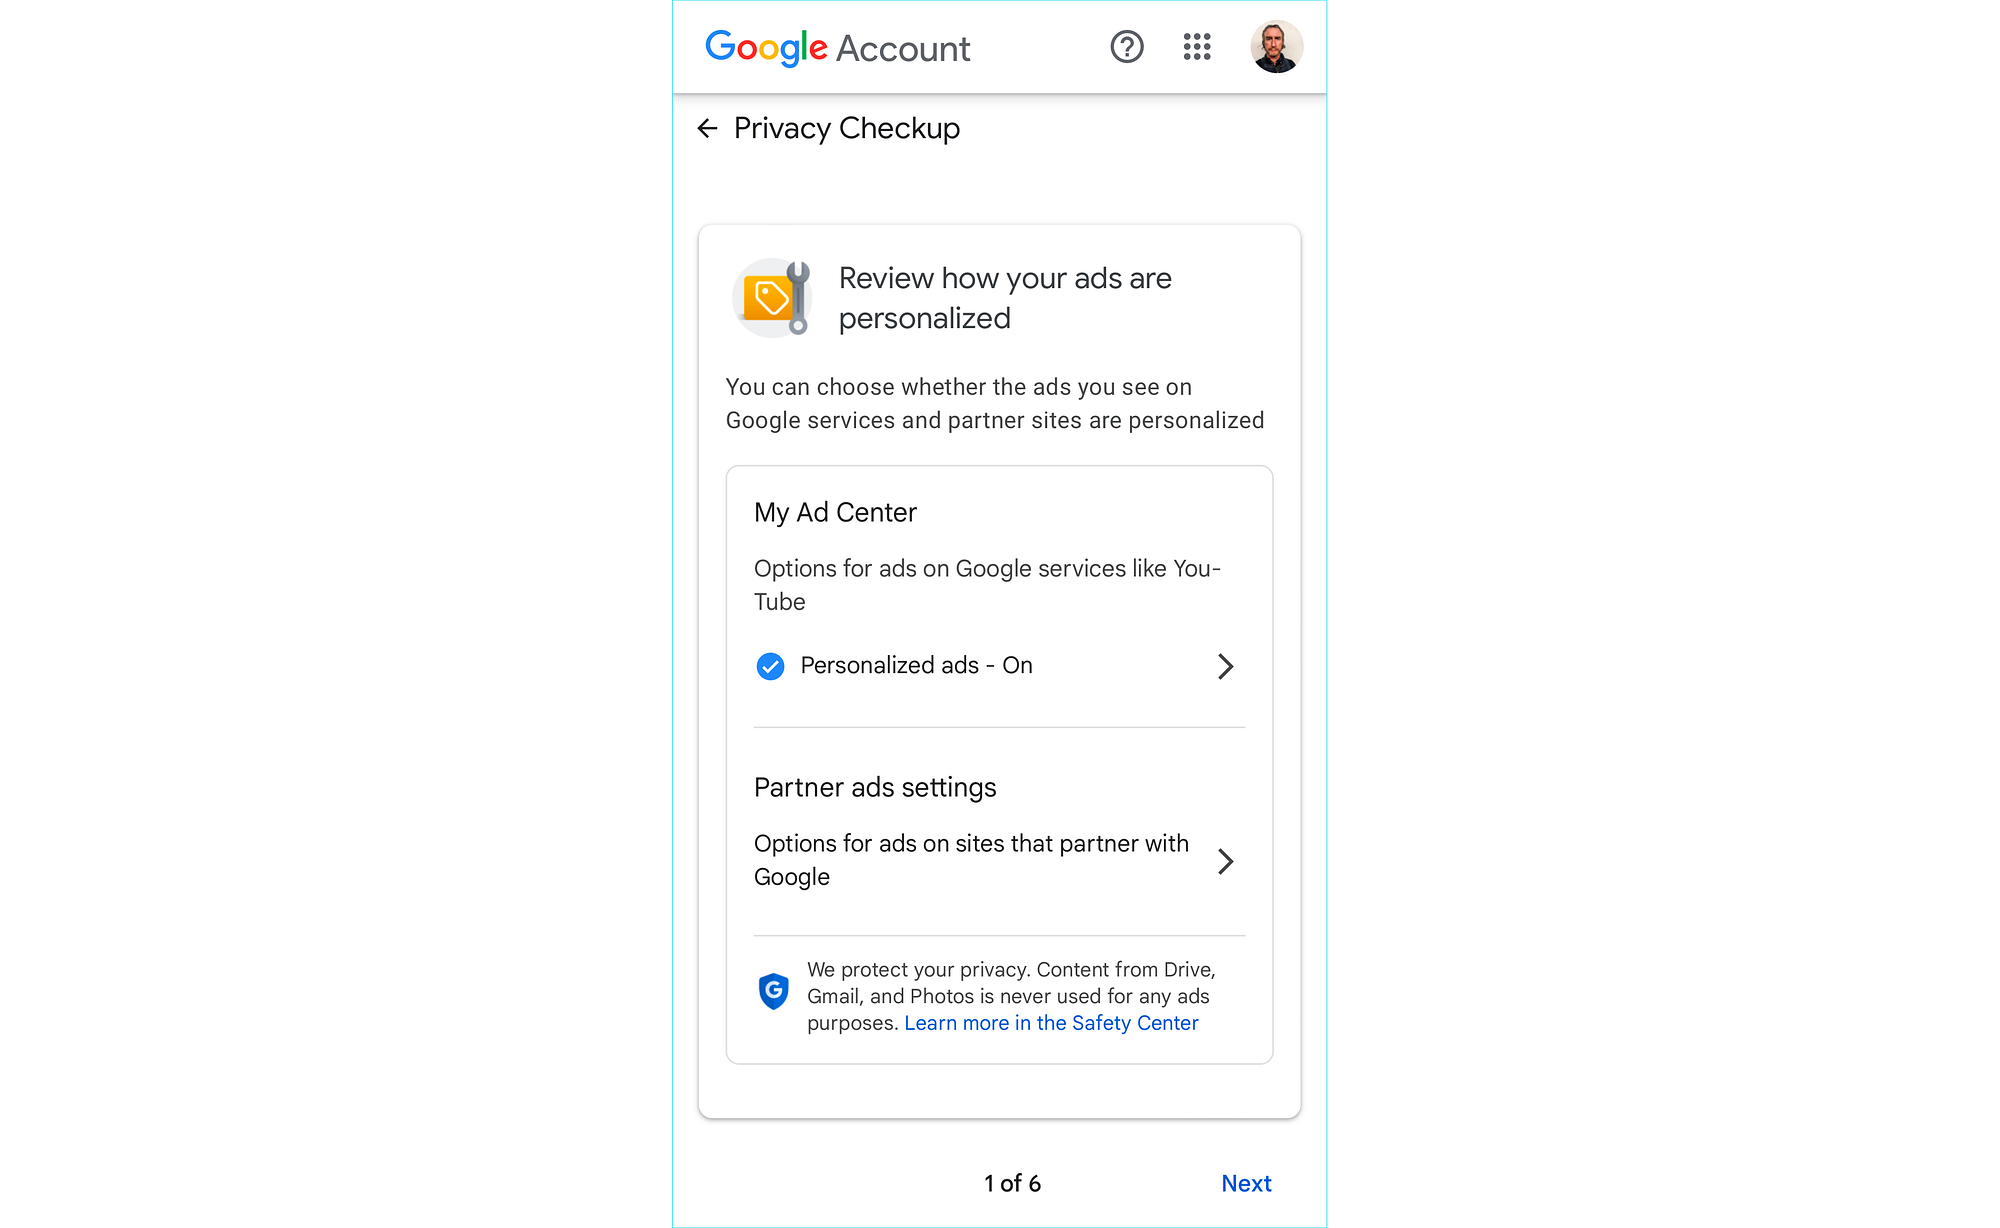 Screenshot from Google’s Privacy Checkup shows the first of six steps. This first focuses on reviewing how your ads are personalized. Users can drill down to make adjustments to personalized ads or ad partner settings or choose to move on to the next step in the checkup.